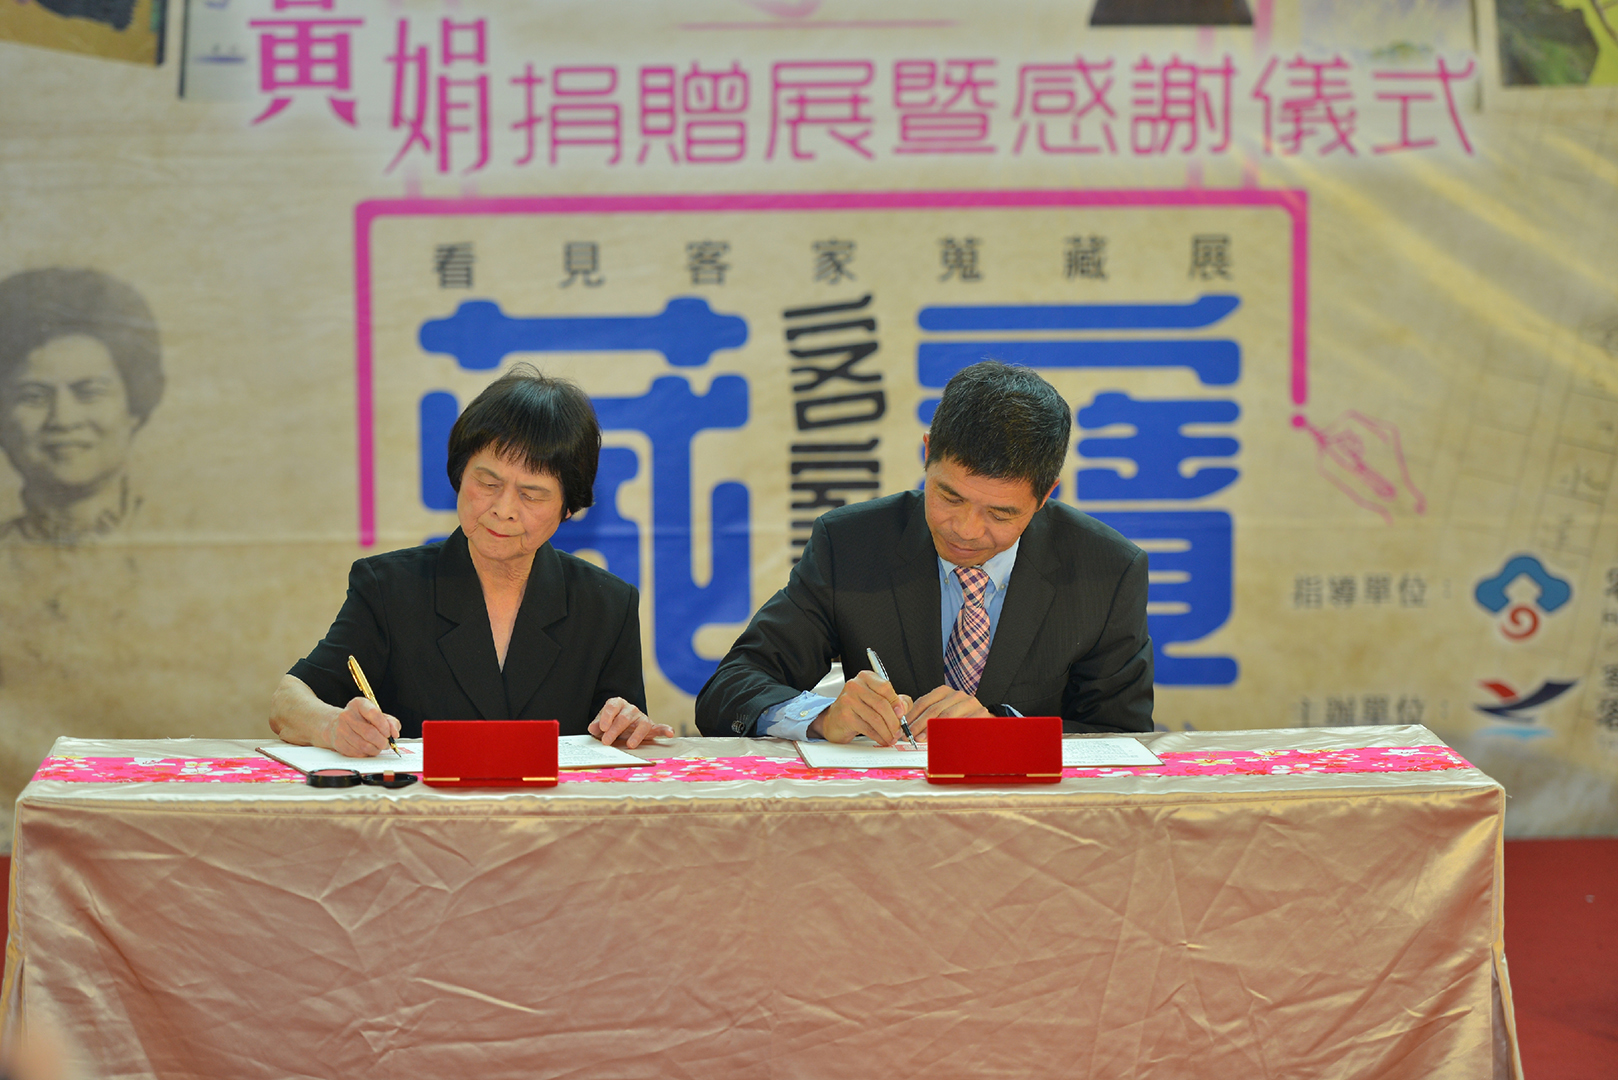 Ms. Huang Juan (left), Award-winner of Hakka Lifetime Contribution, along with Ho Chin Liang (right), Director of the Taiwan Hakka Cultural Development Center signs the donation consent.